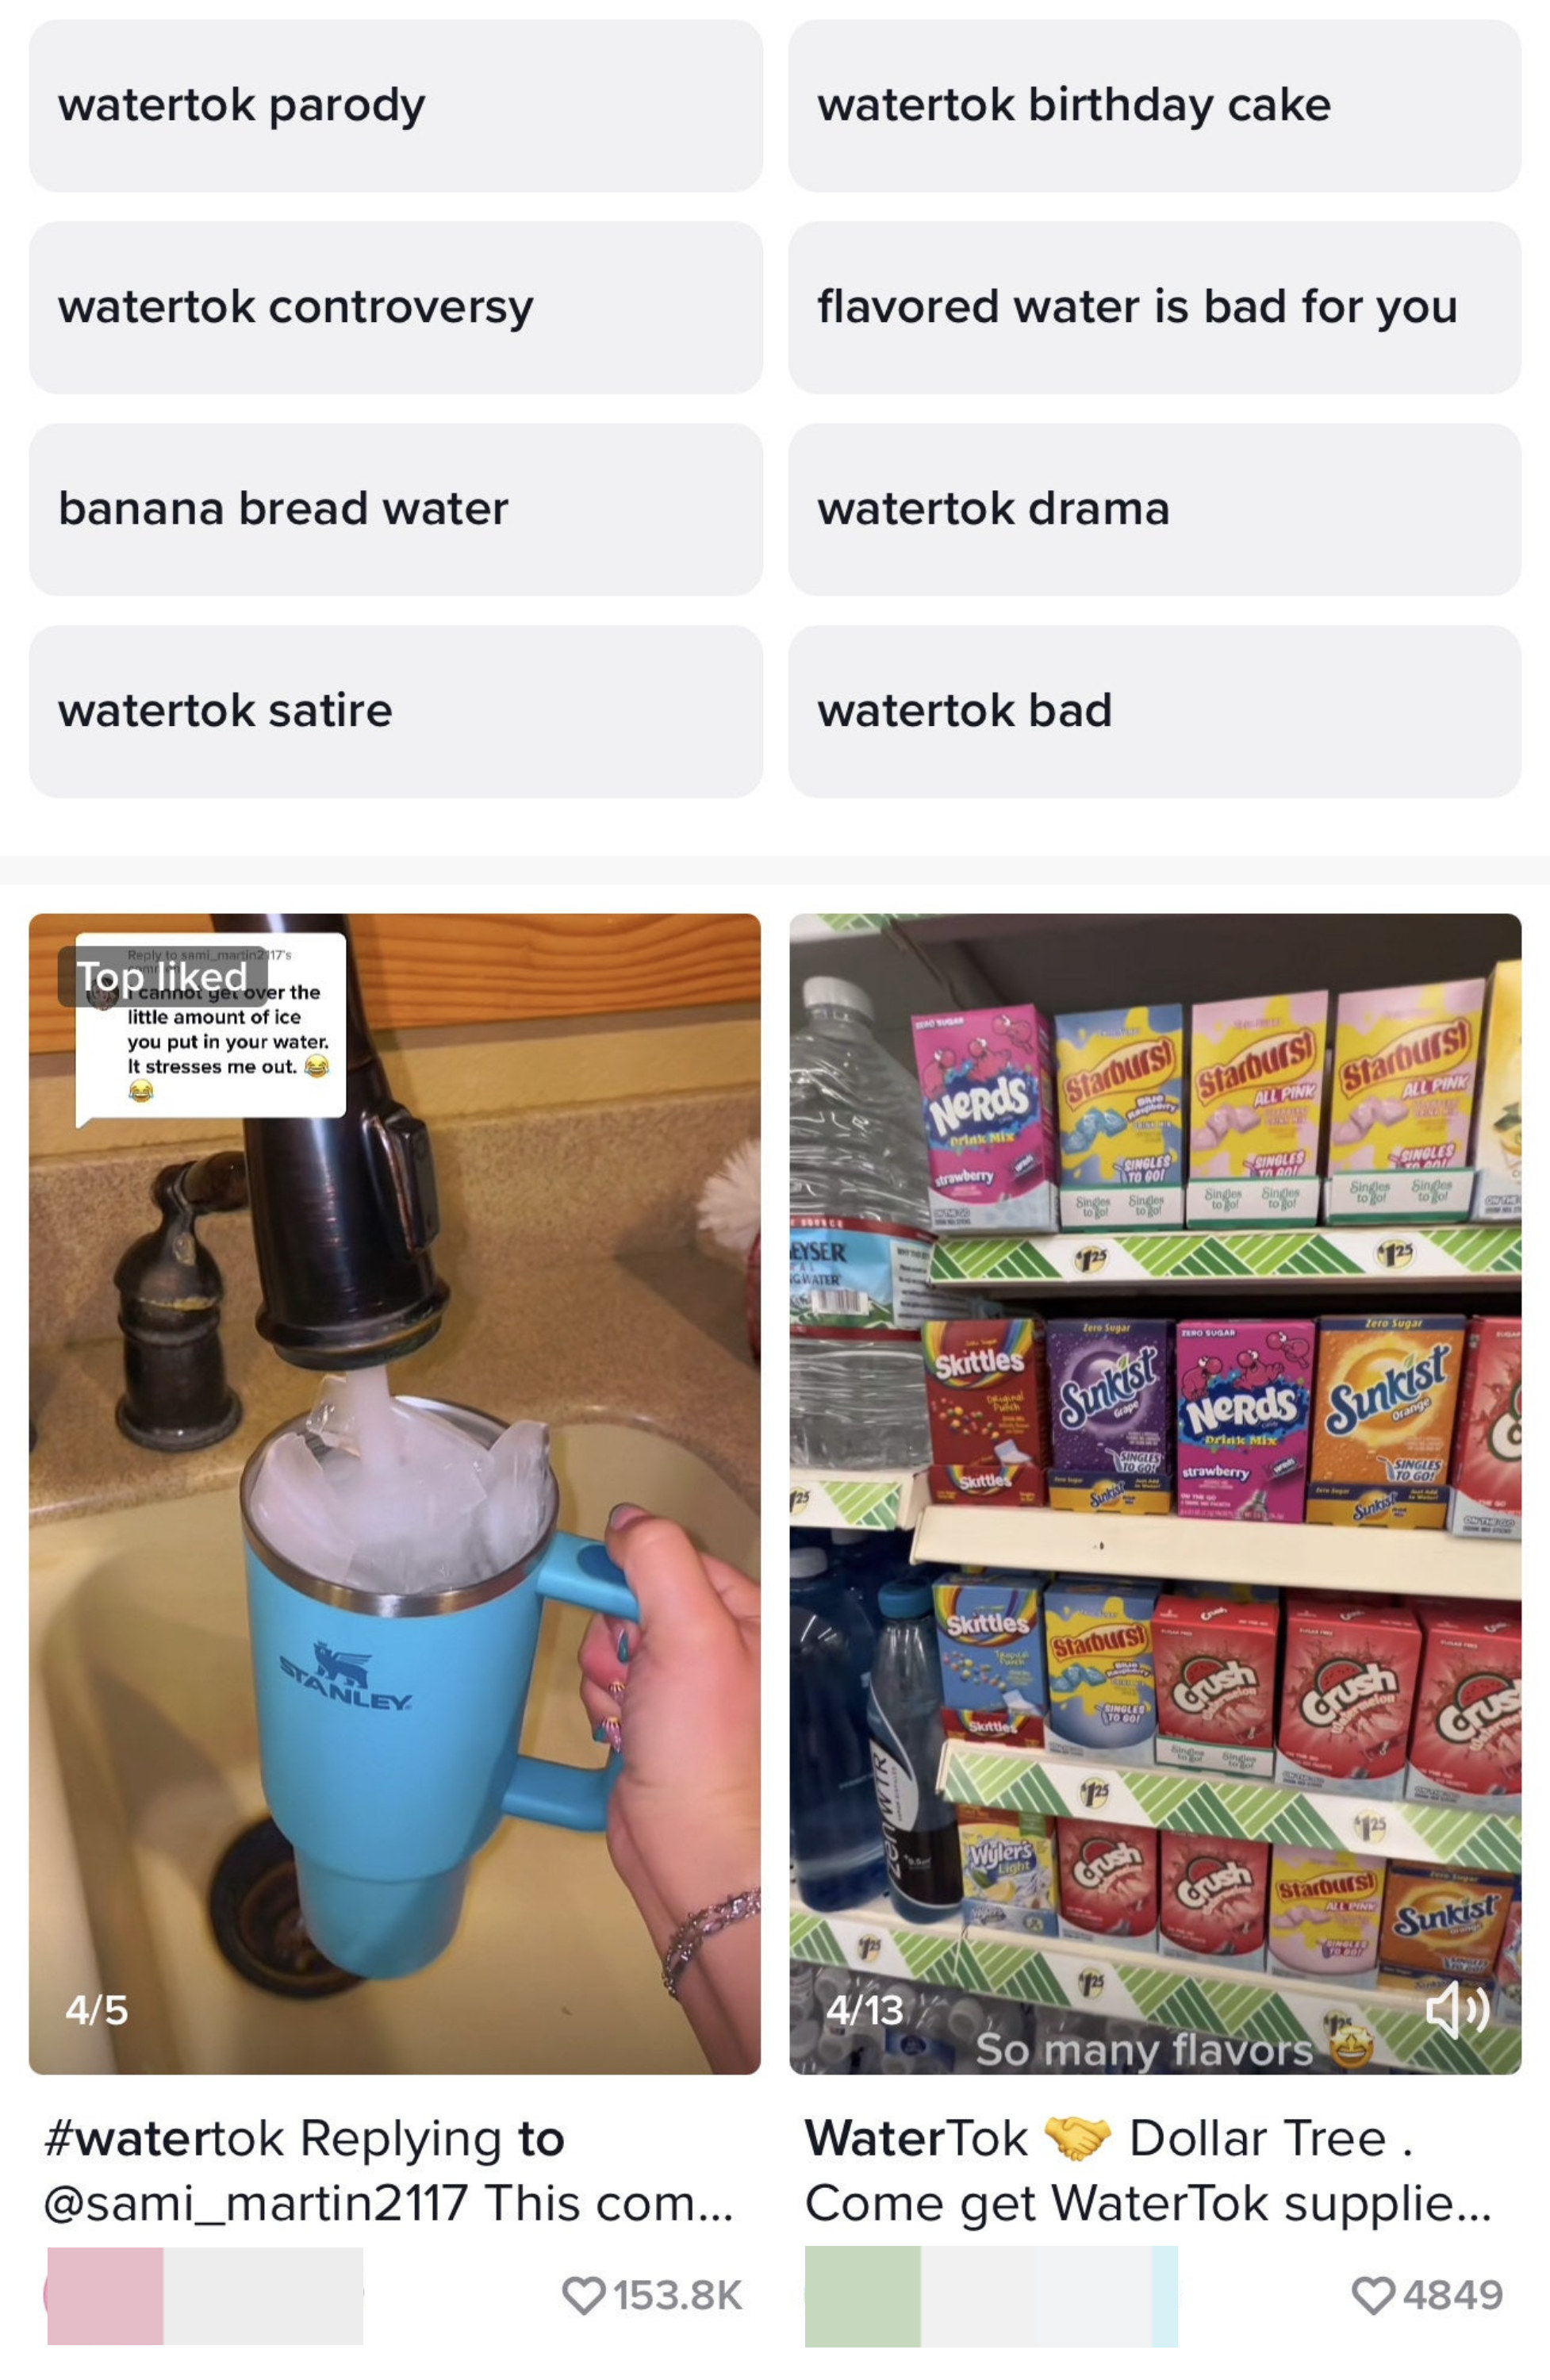 Various searches related to WaterTok, like WaterTok controversy and flavored water is bad for you, and two videos of people filling up a Stanley cup with water and various candy-flavored water packets